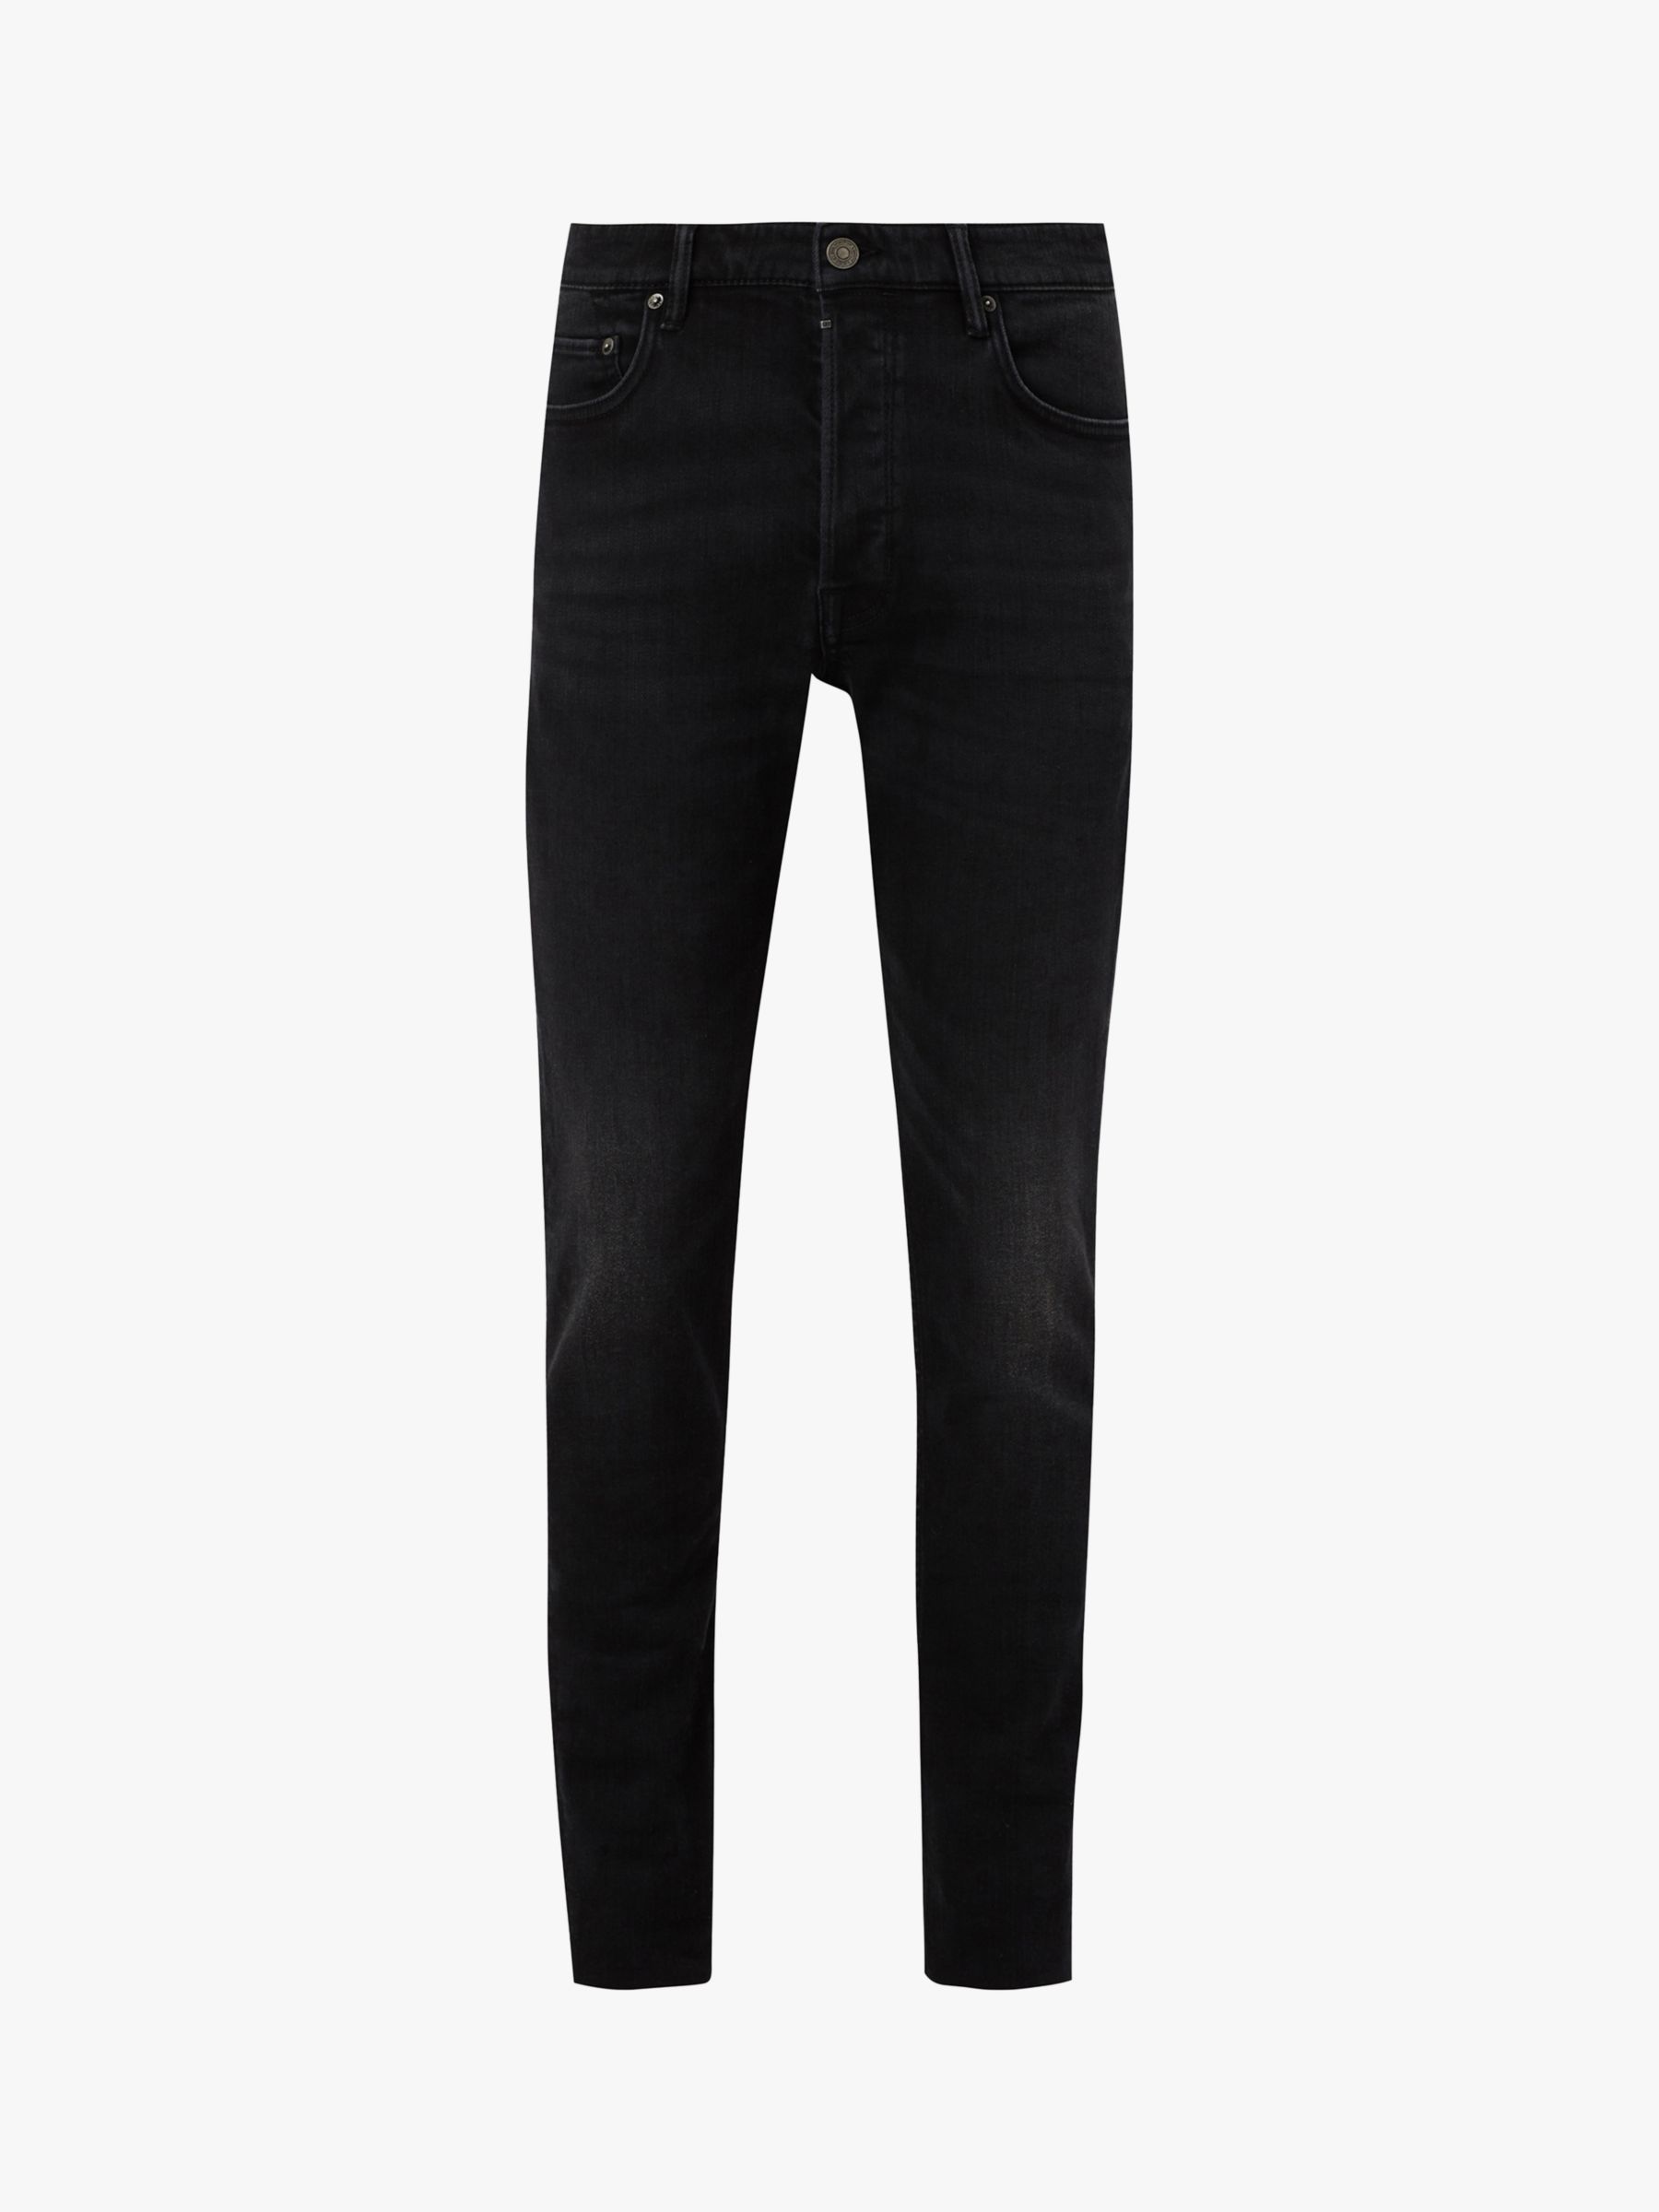 AllSaints Rex Straight Skinny Fit Jeans, Washed Black at John Lewis ...